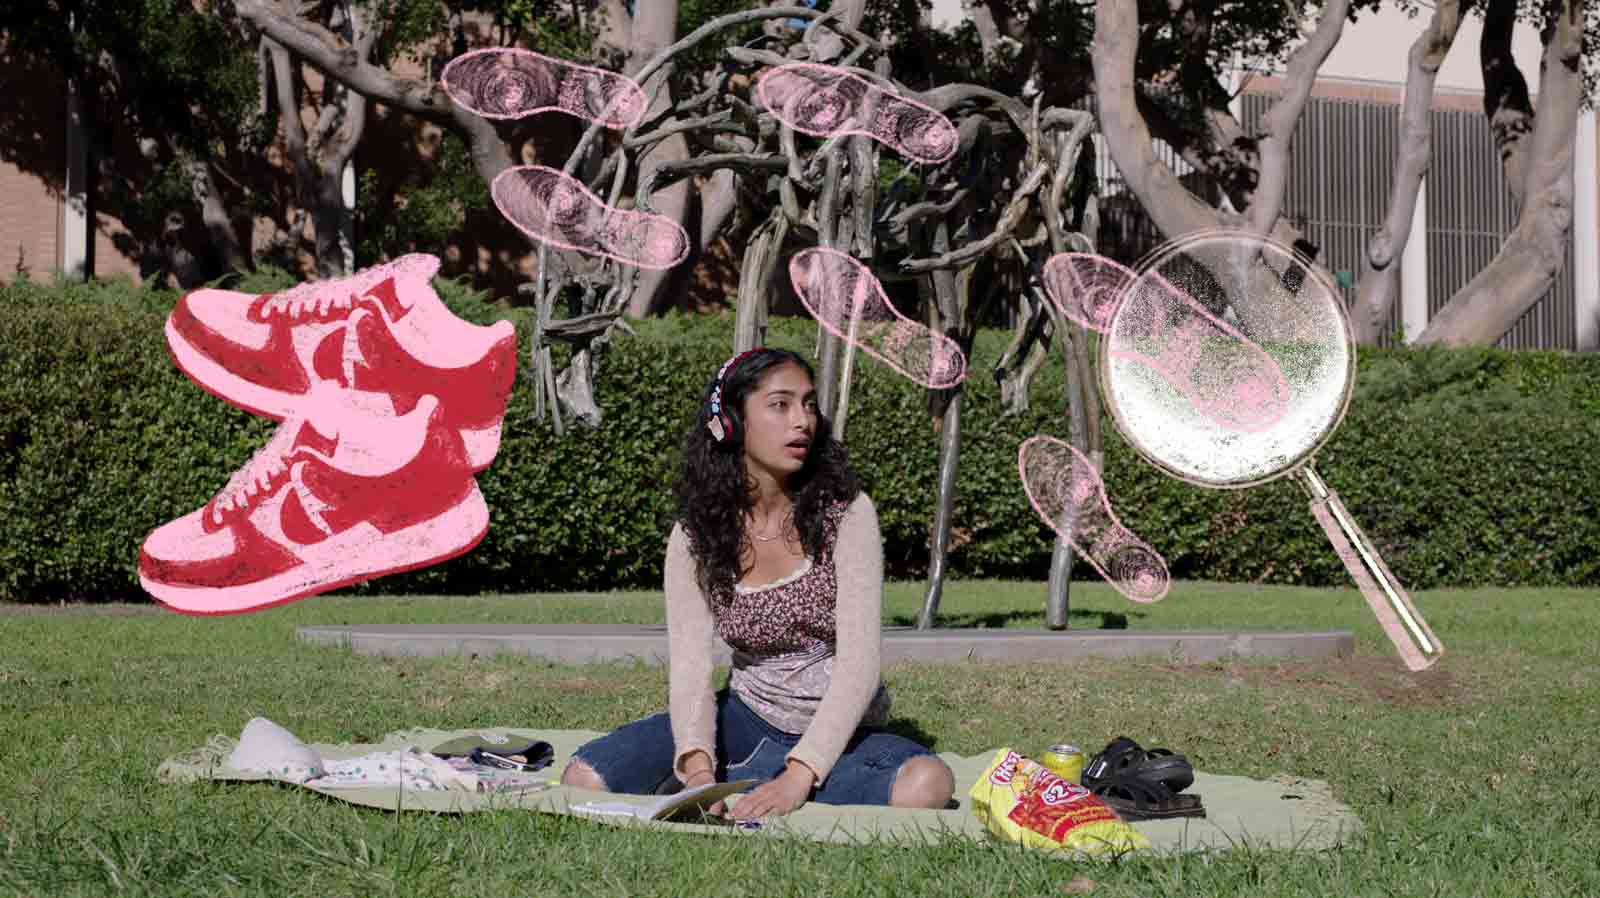 Dedicated to South Asian girls, thesis film 'Ladke' pays homage to rom-com genre - Daily Bruin